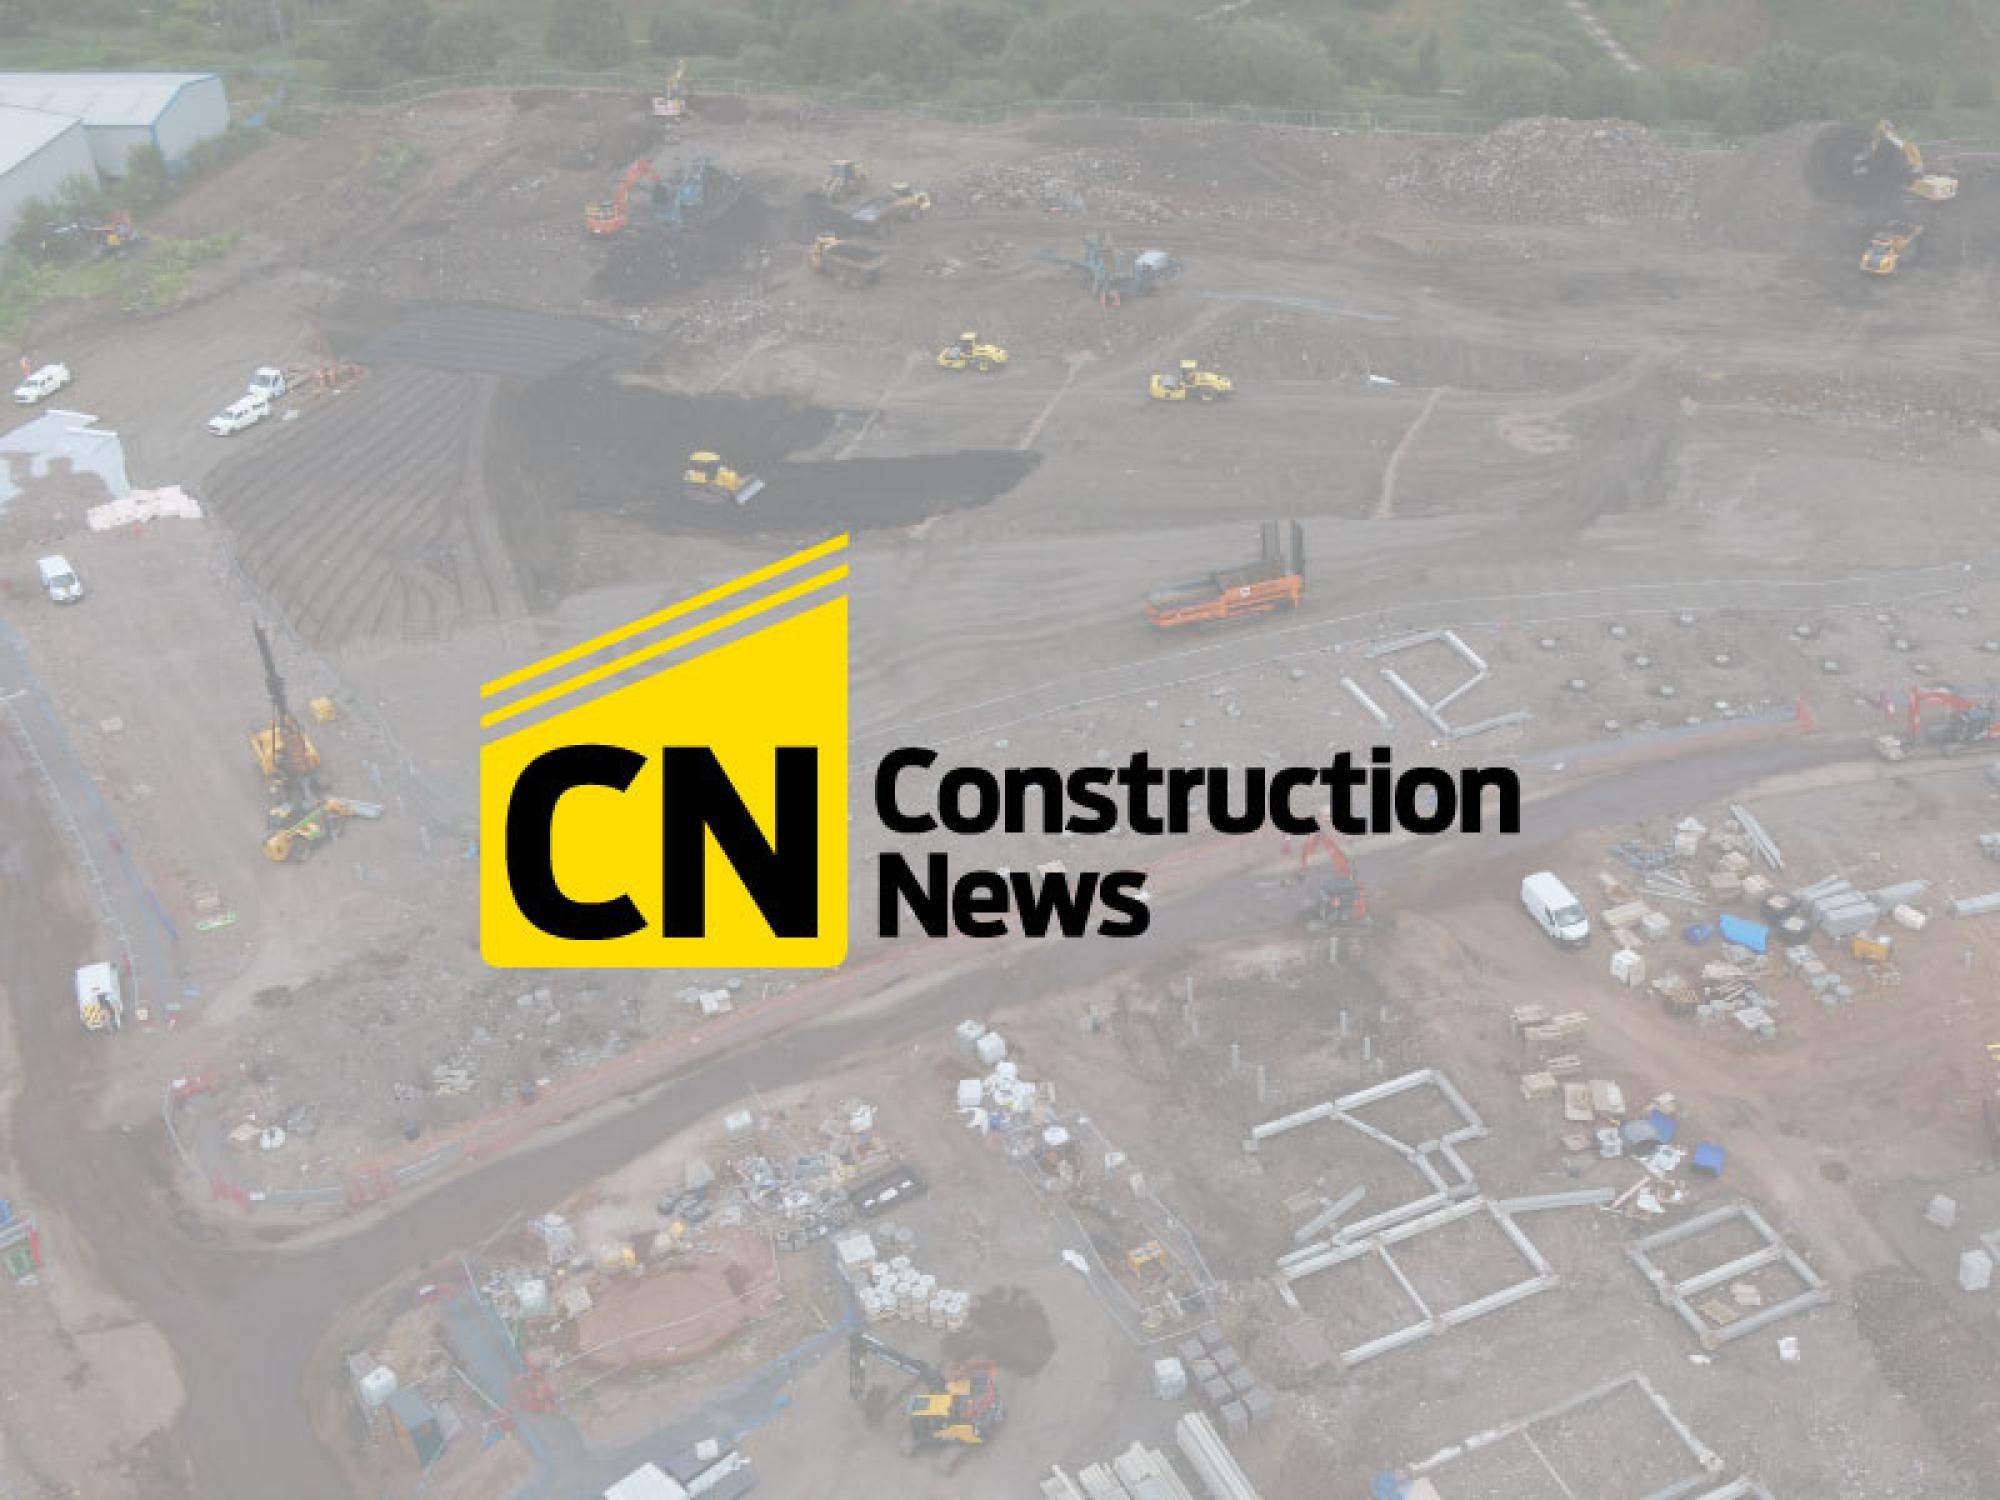 Construction News has named McAuliffe in its list of the UK’s Top Ten Ground Engineering Contractors for 2022.